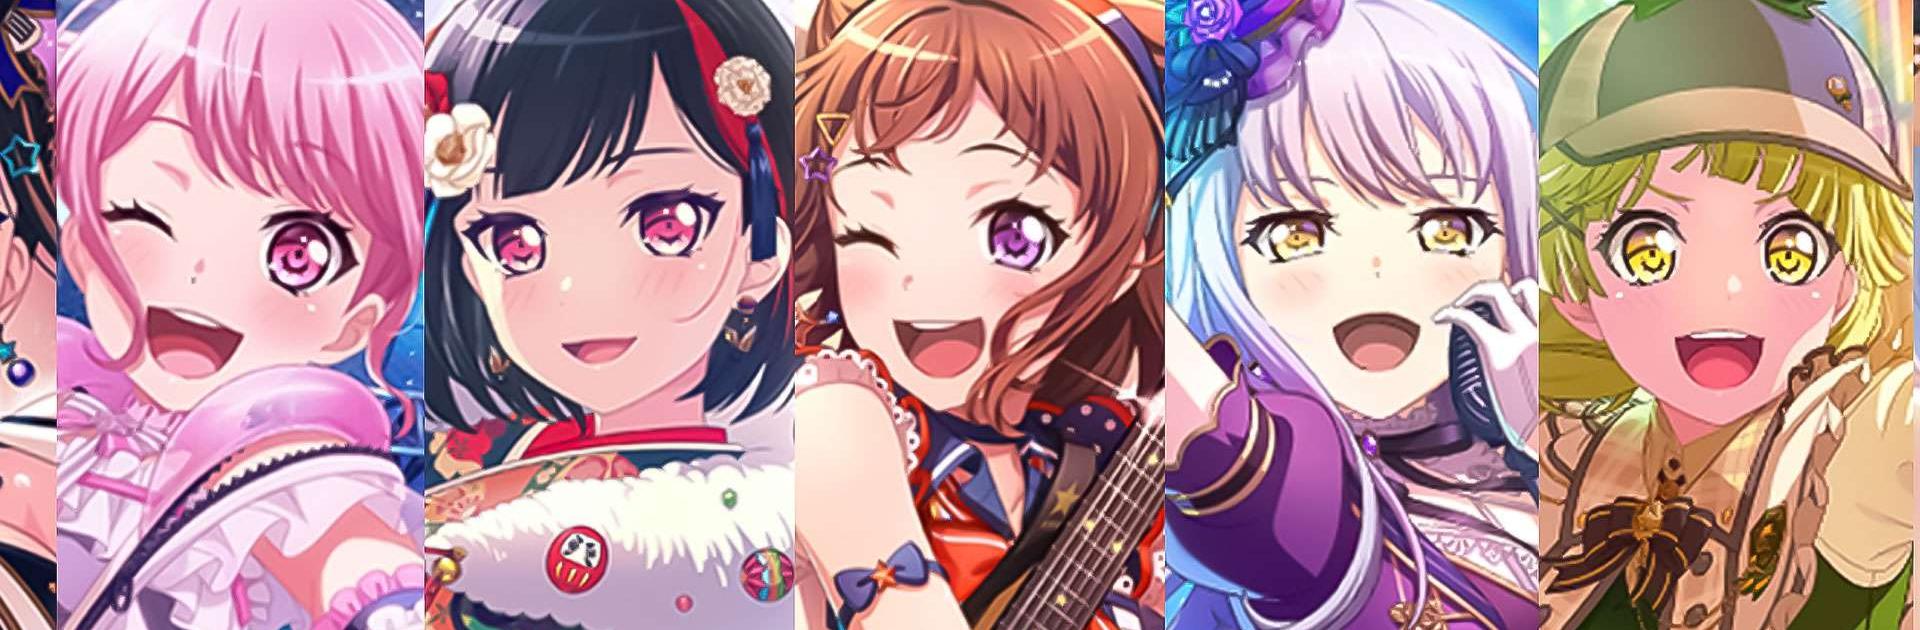 ABOUT  BanG Dream! Girls Band Party!